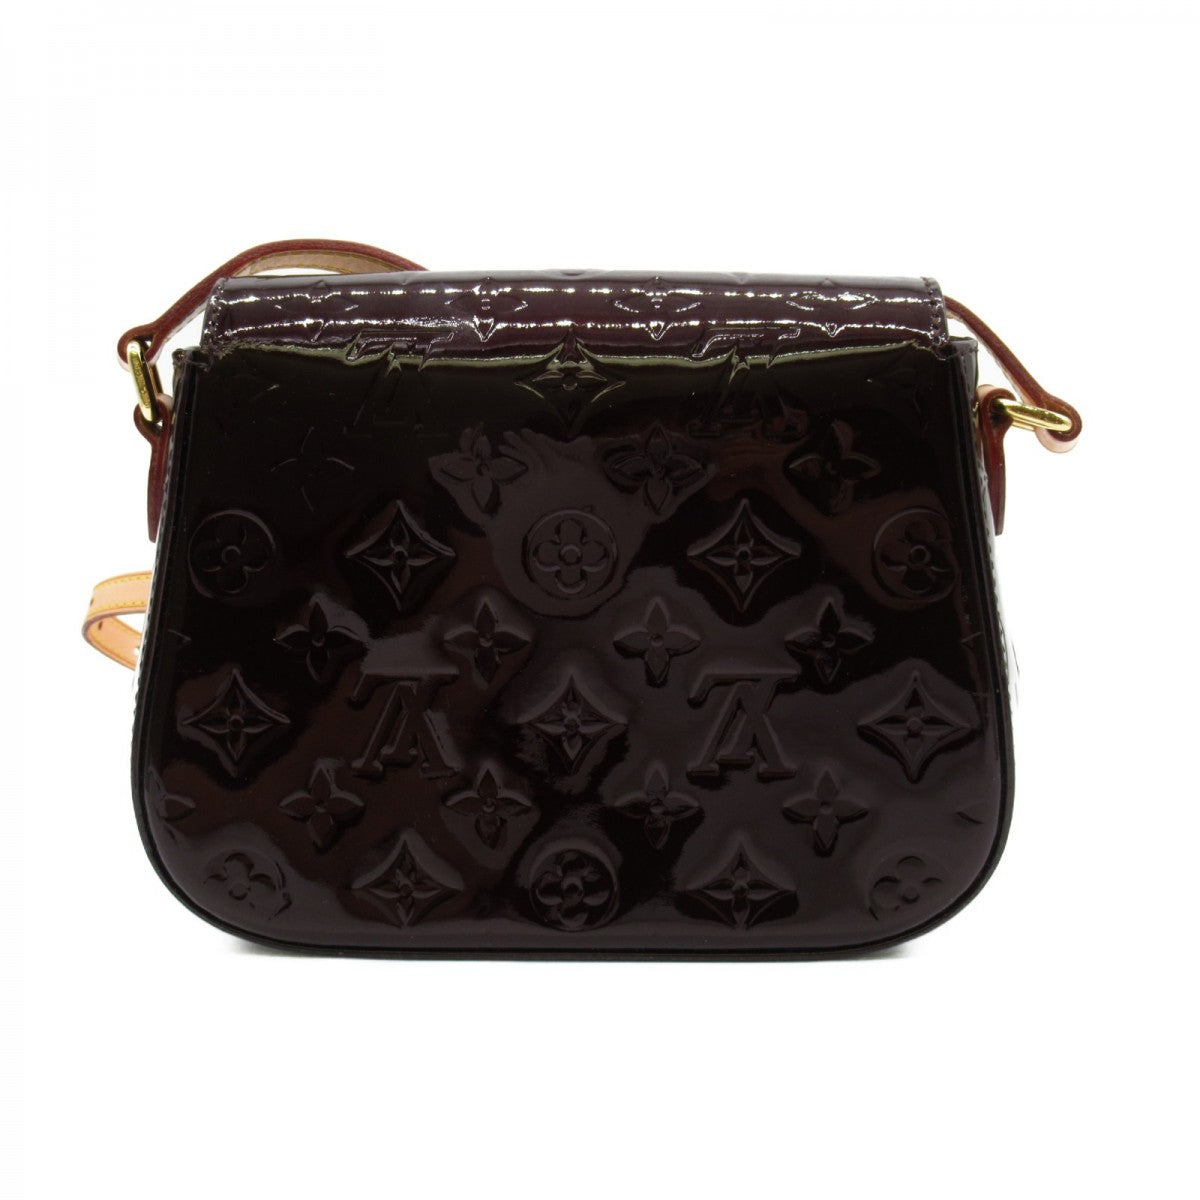 Louis Vuitton Monogram Vernis Bellflower PM Others Crossbody Bag M91704 in Excellent condition